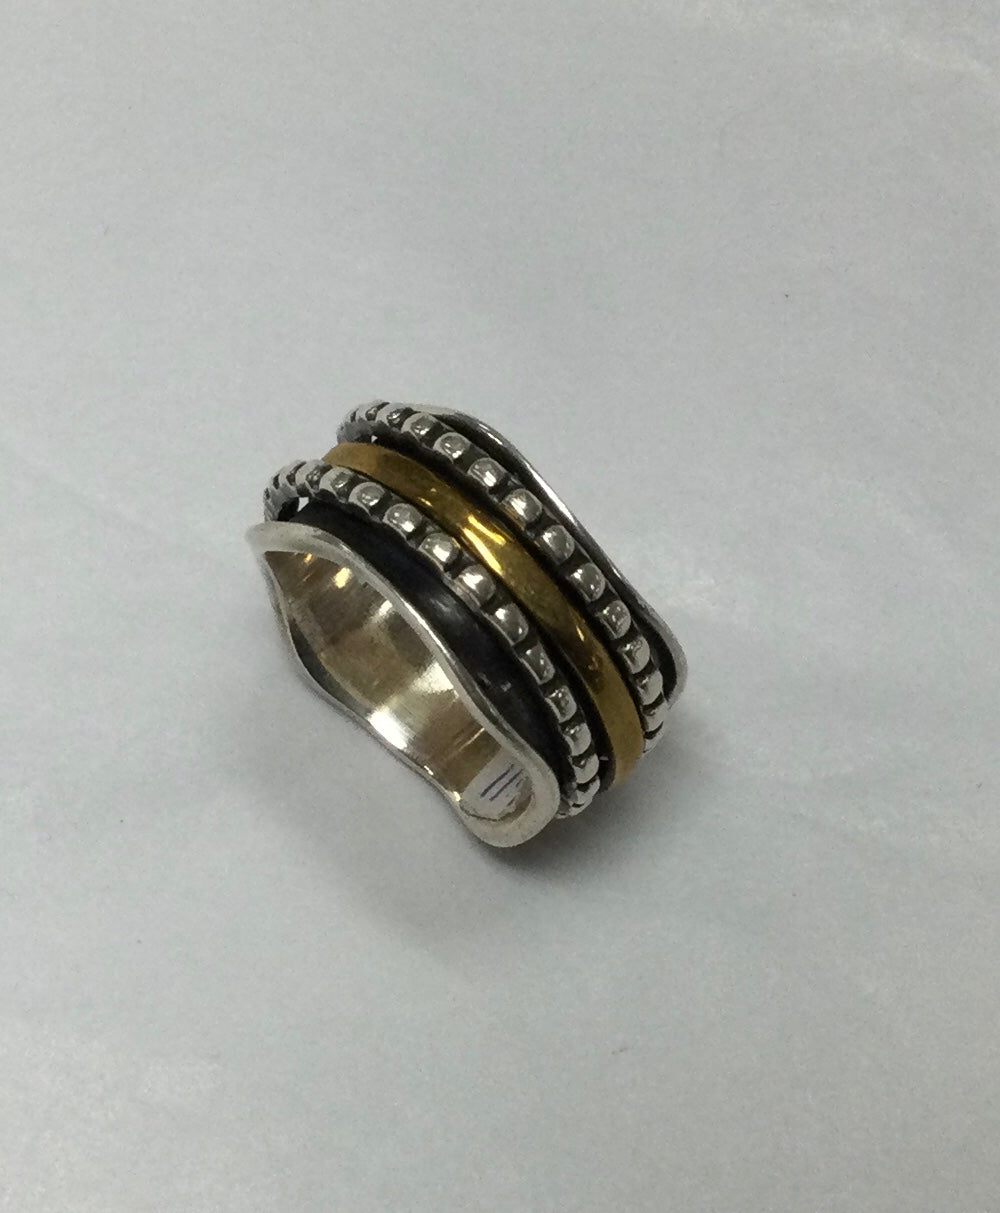 Meditation Ring, Silver with Brass Middle Band, Bordered by Beaded Silver Bands